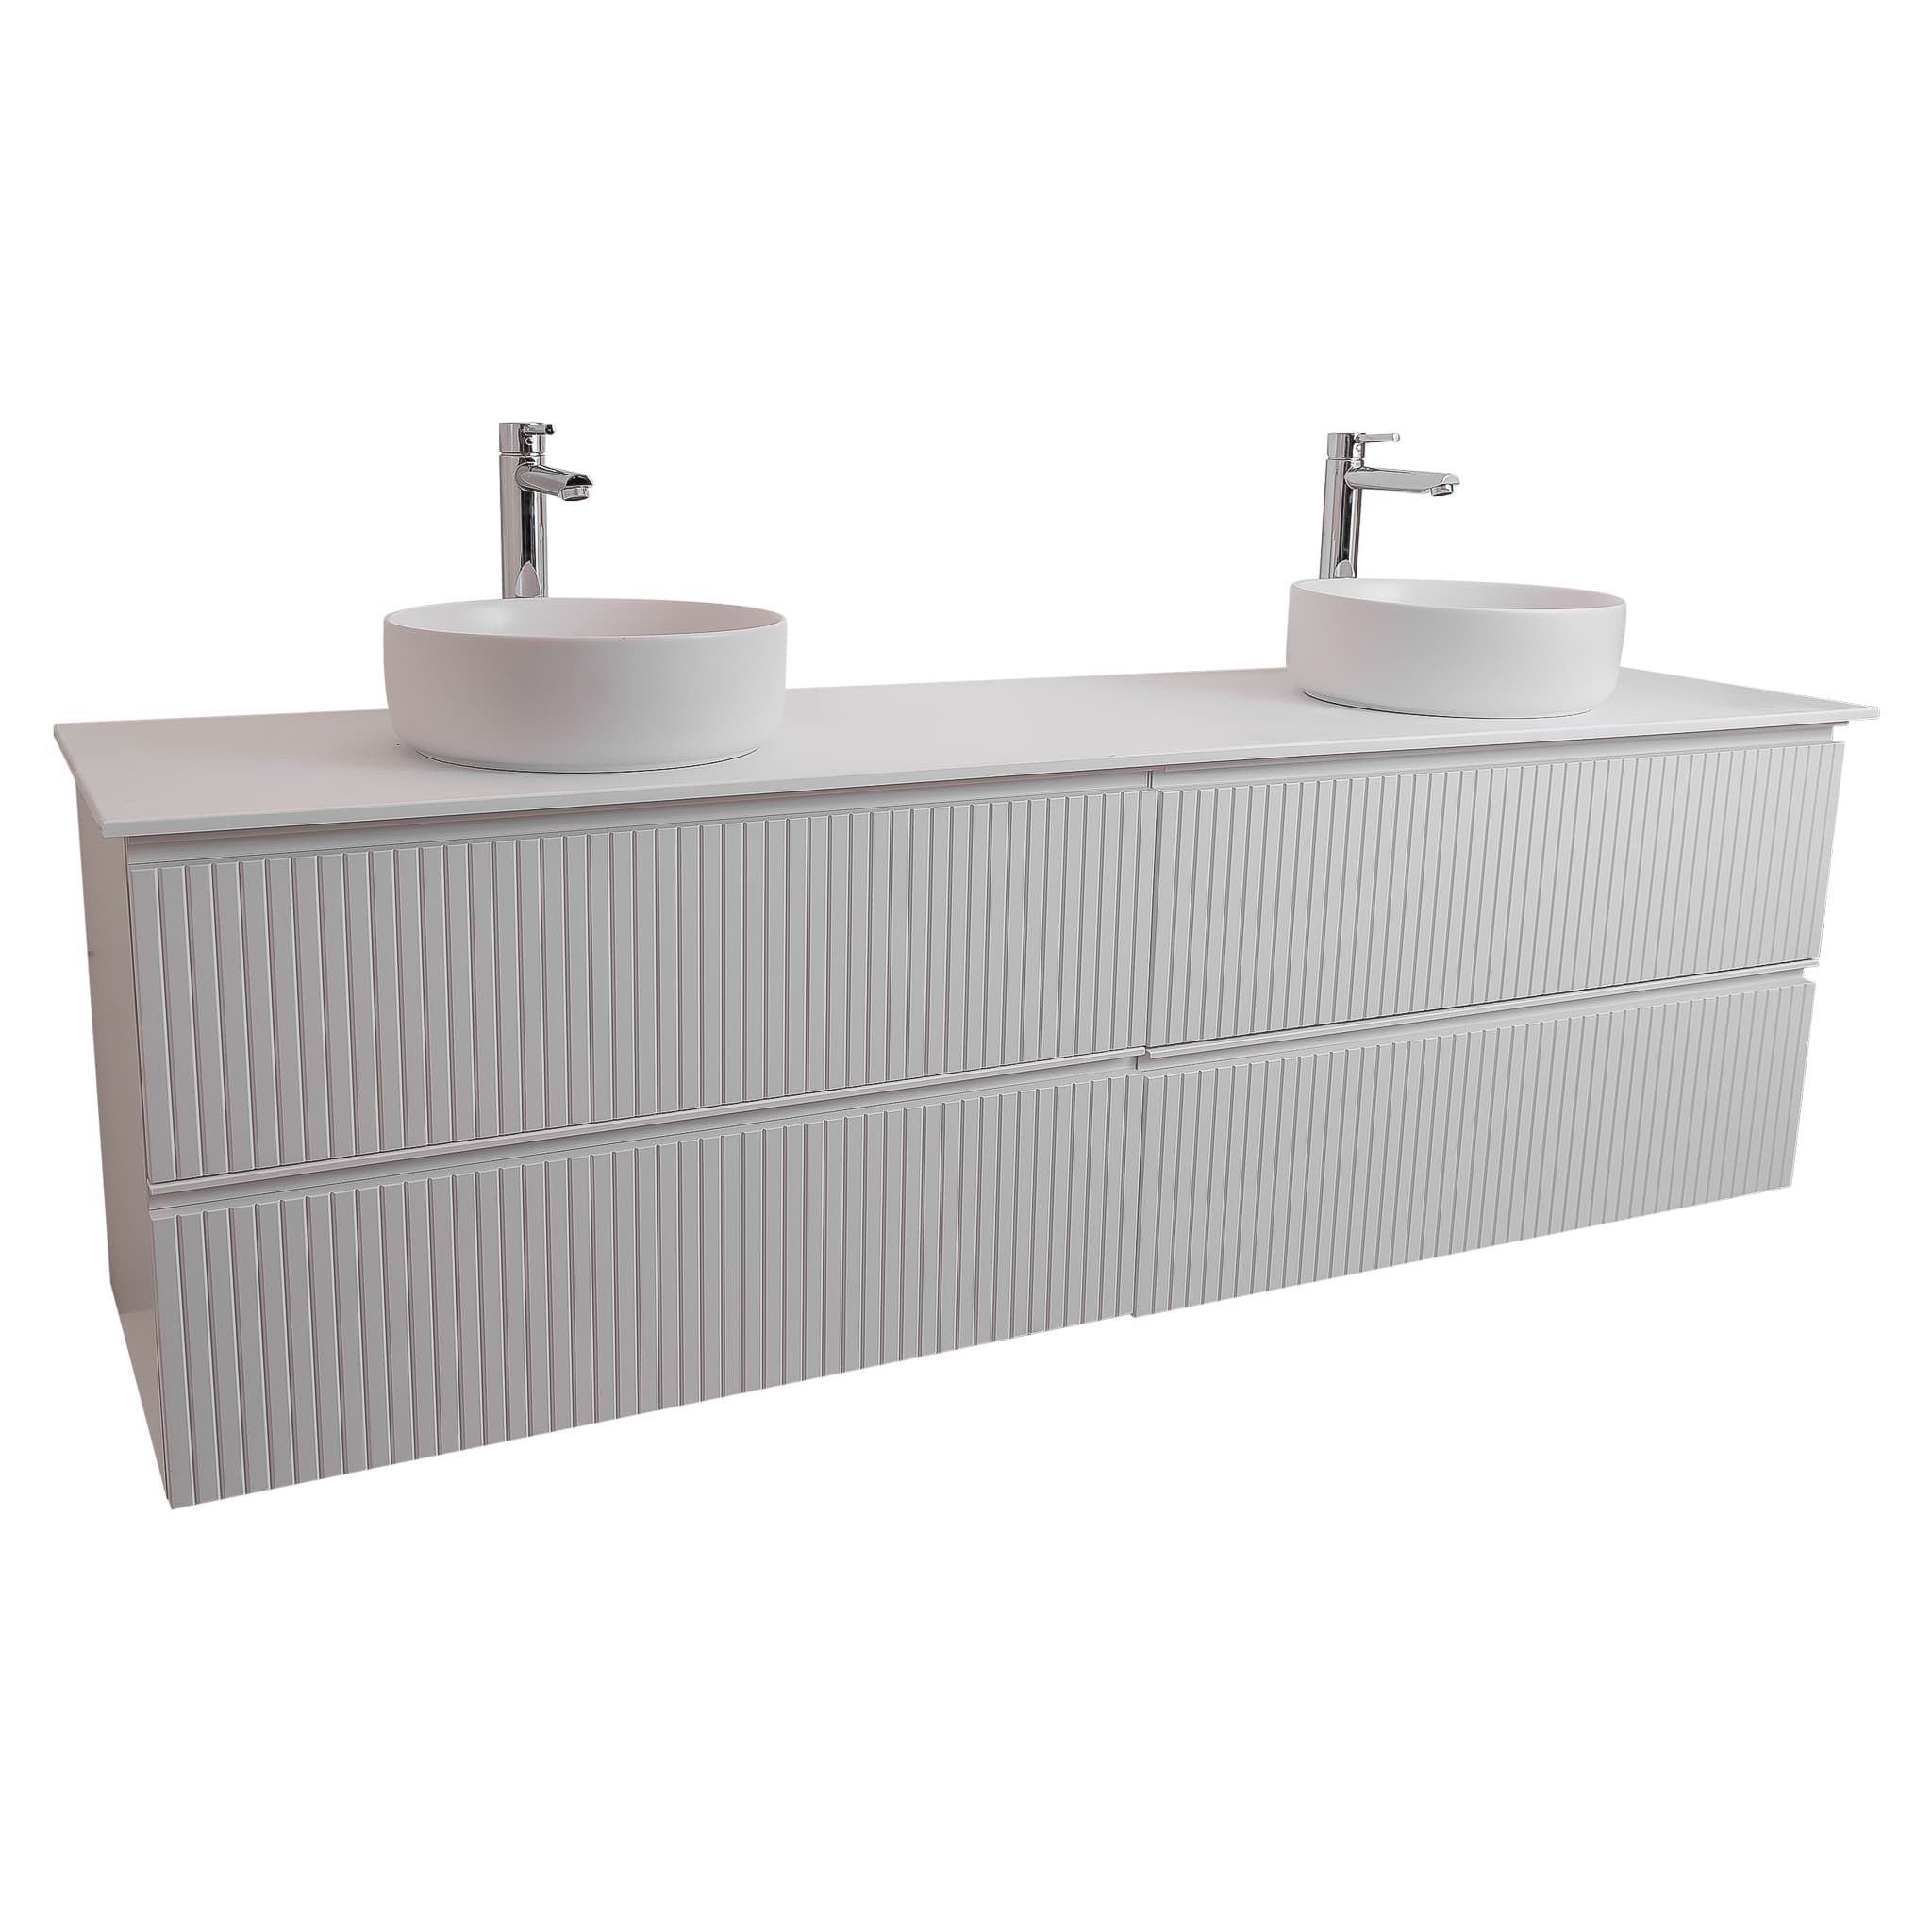 Ares 72 Matte White Cabinet, Ares White Top And Two Ares White Ceramic Basin, Wall Mounted Modern Vanity Set